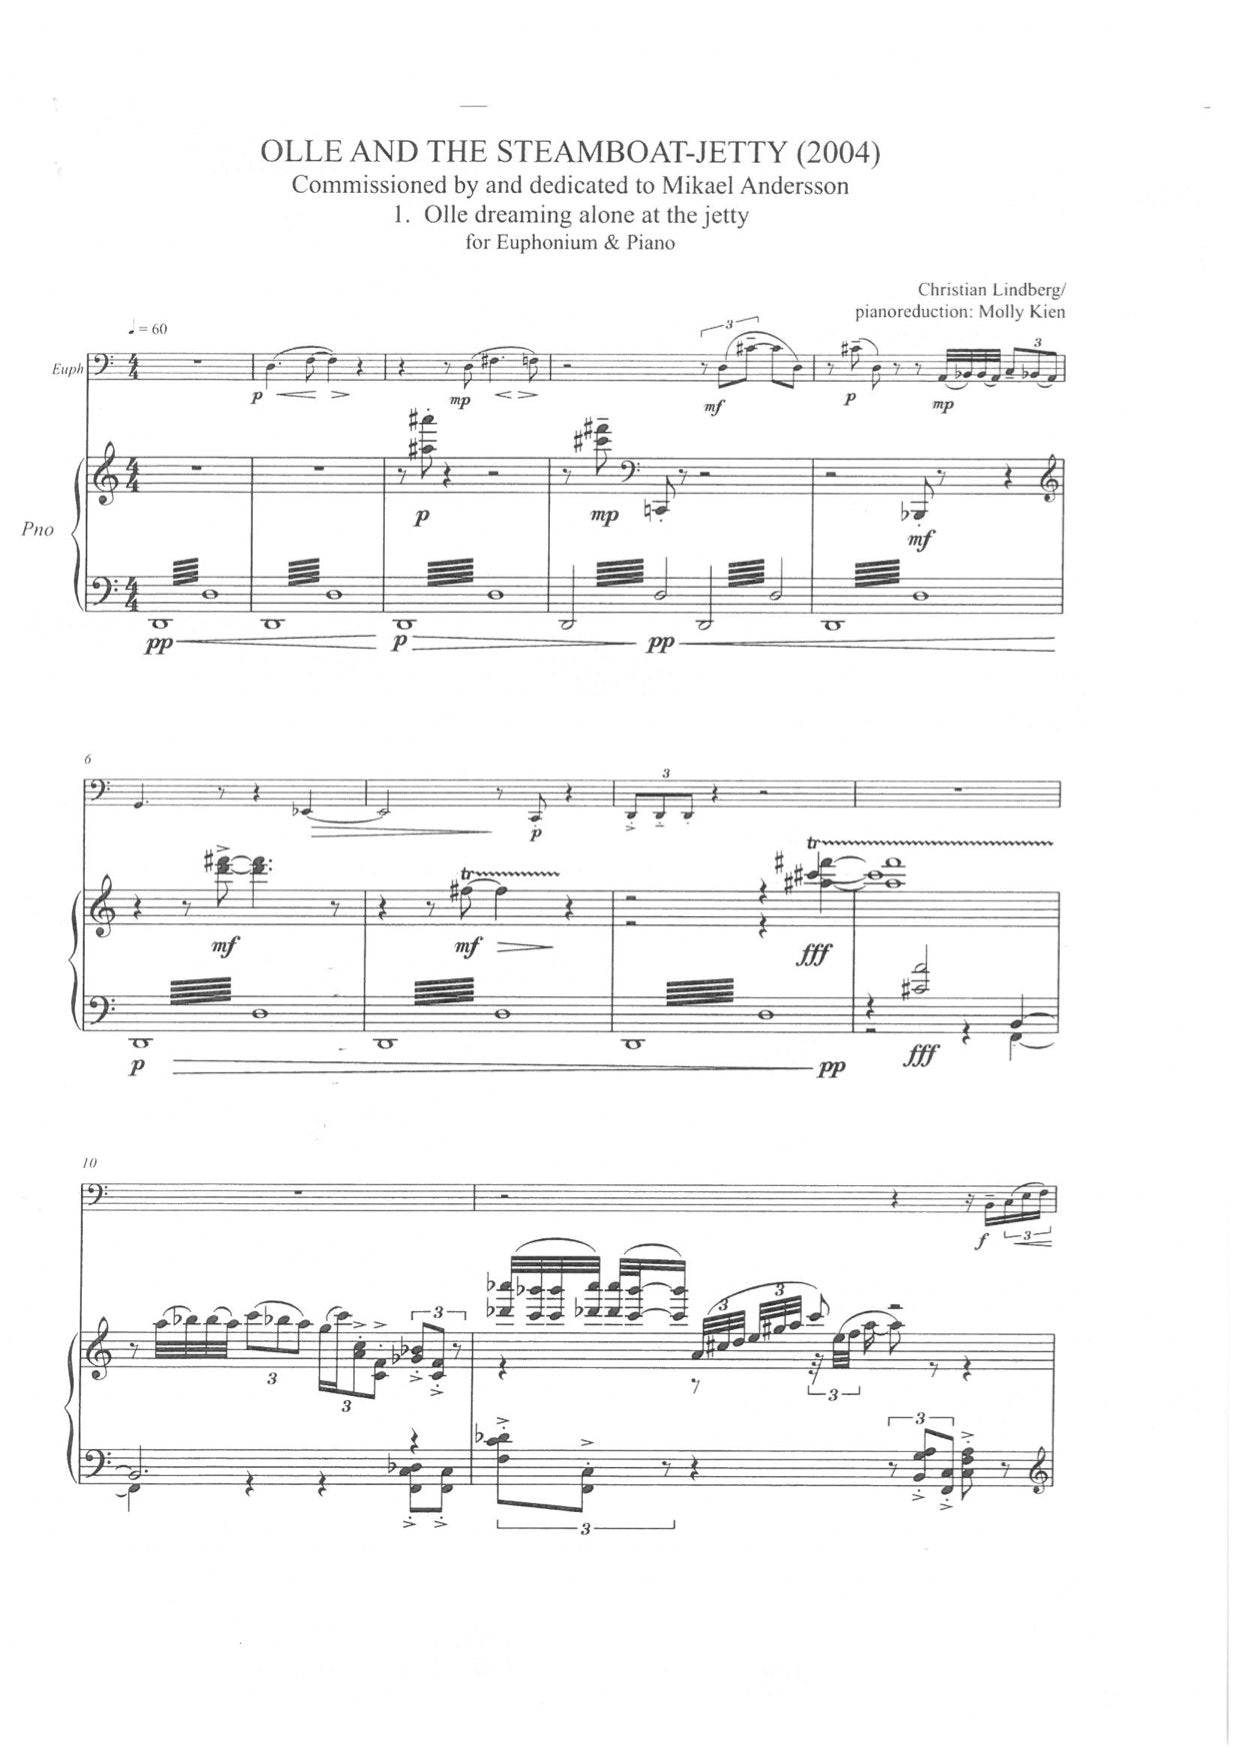 Christian Lindberg - Olle and the Steamboatjetty - Piano reduction of the Euphonium Concerto